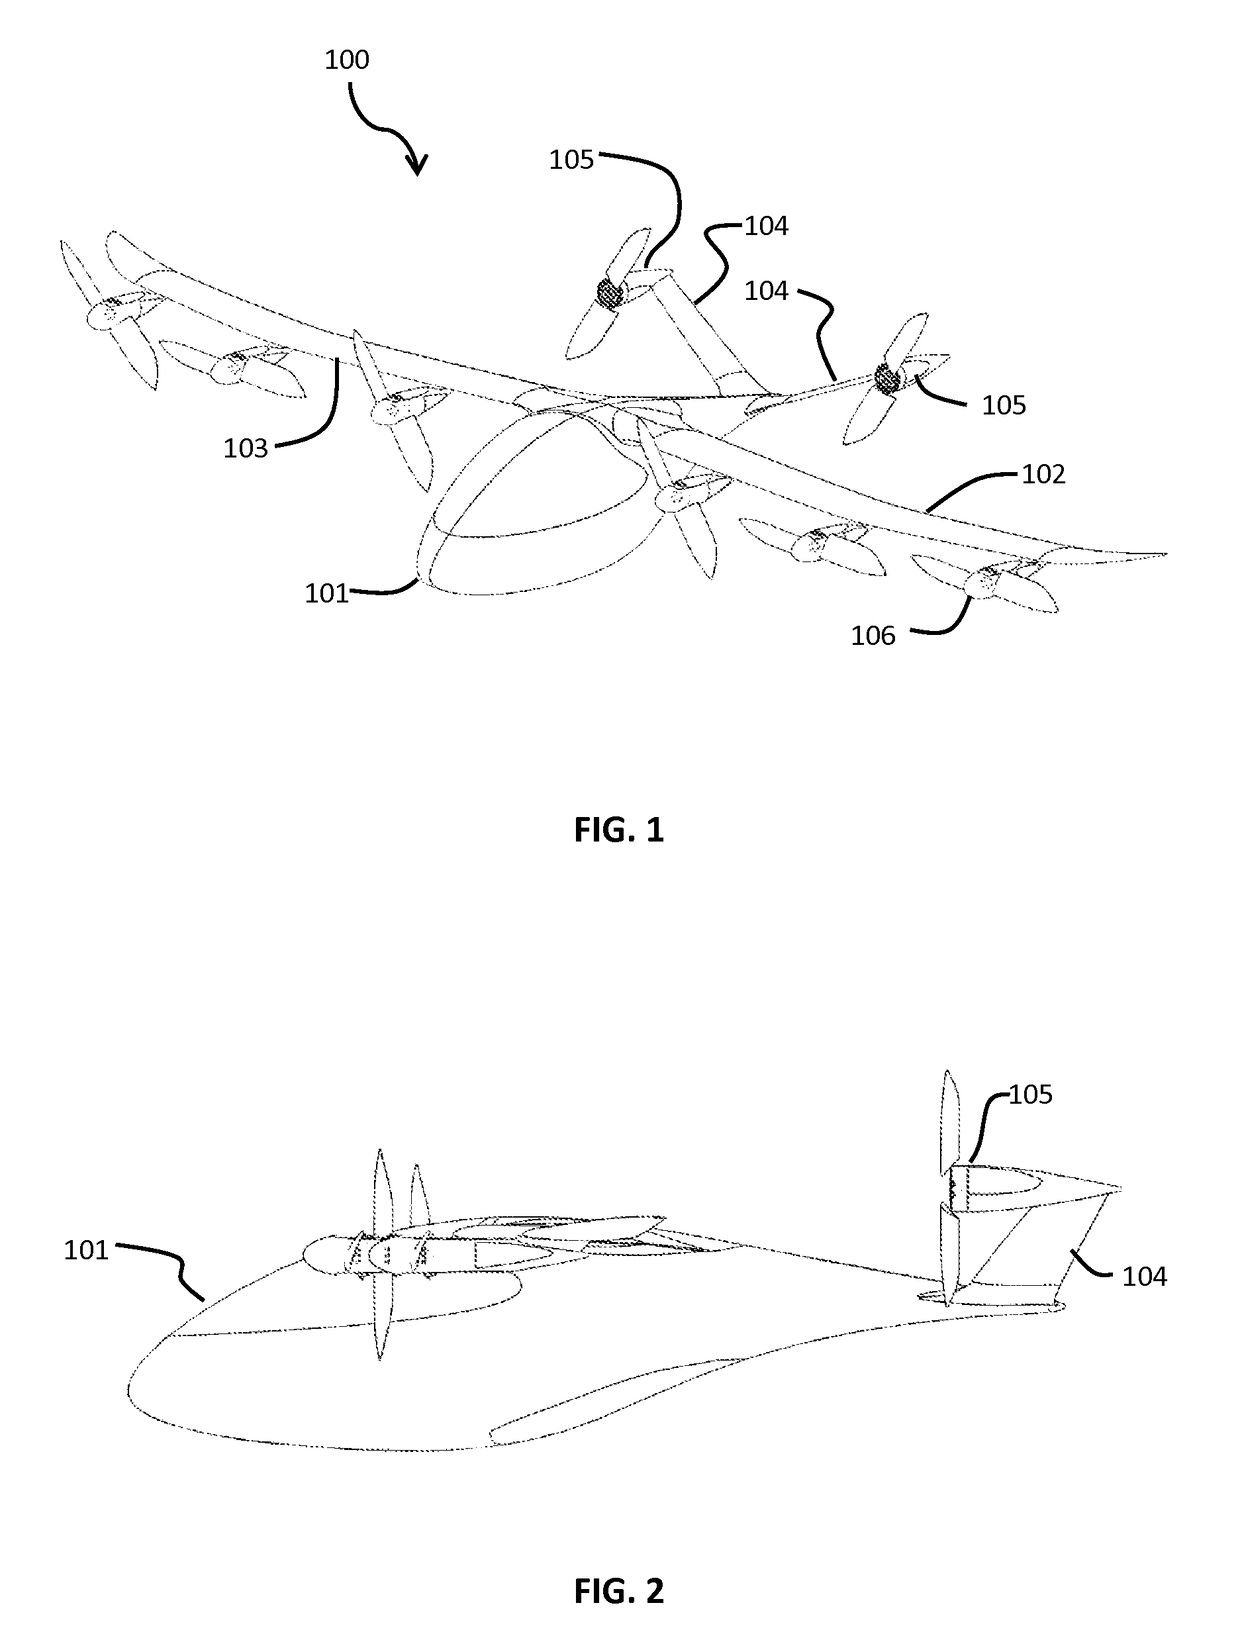 Aerodynamically efficient lightweight vertical take-off and landing aircraft with pivoting rotors and stowing rotor blades